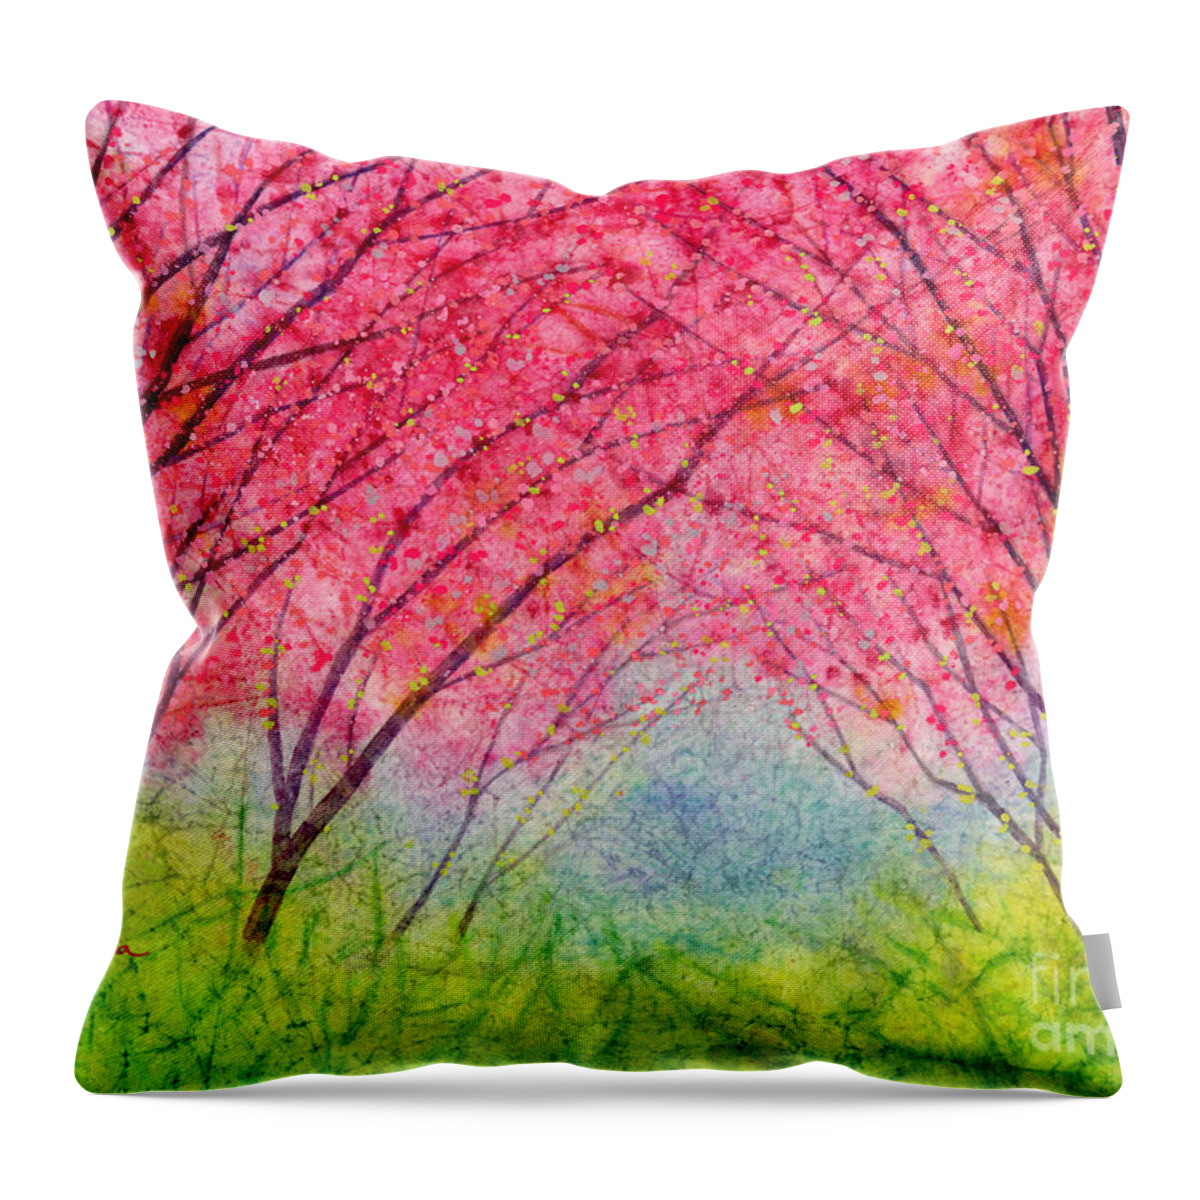 Pink Throw Pillow featuring the painting Pink Coral by Hailey E Herrera